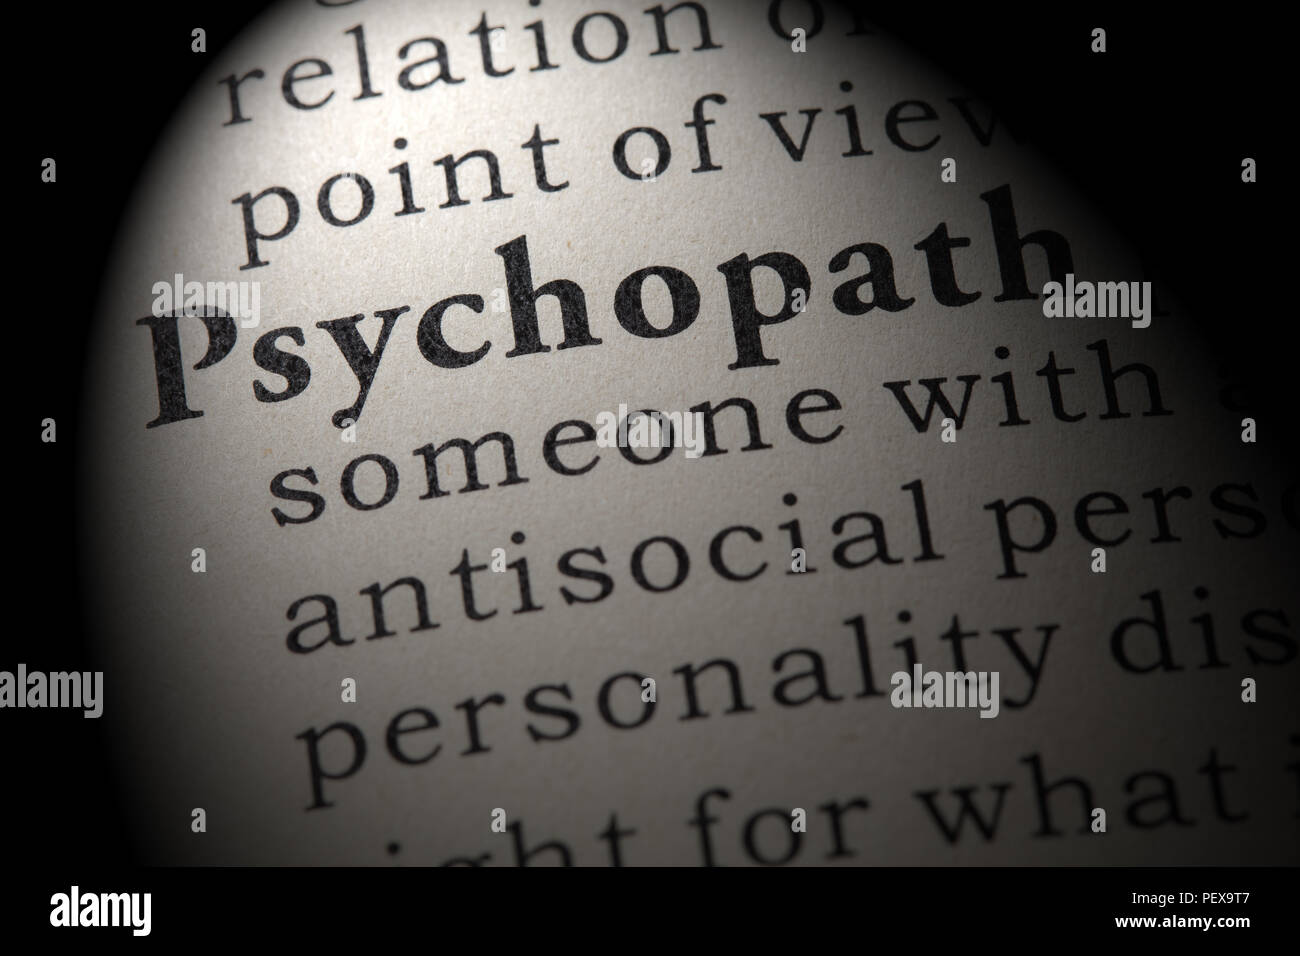 Fake Dictionary, Dictionary definition of the word psychopath. including key descriptive words. Stock Photo